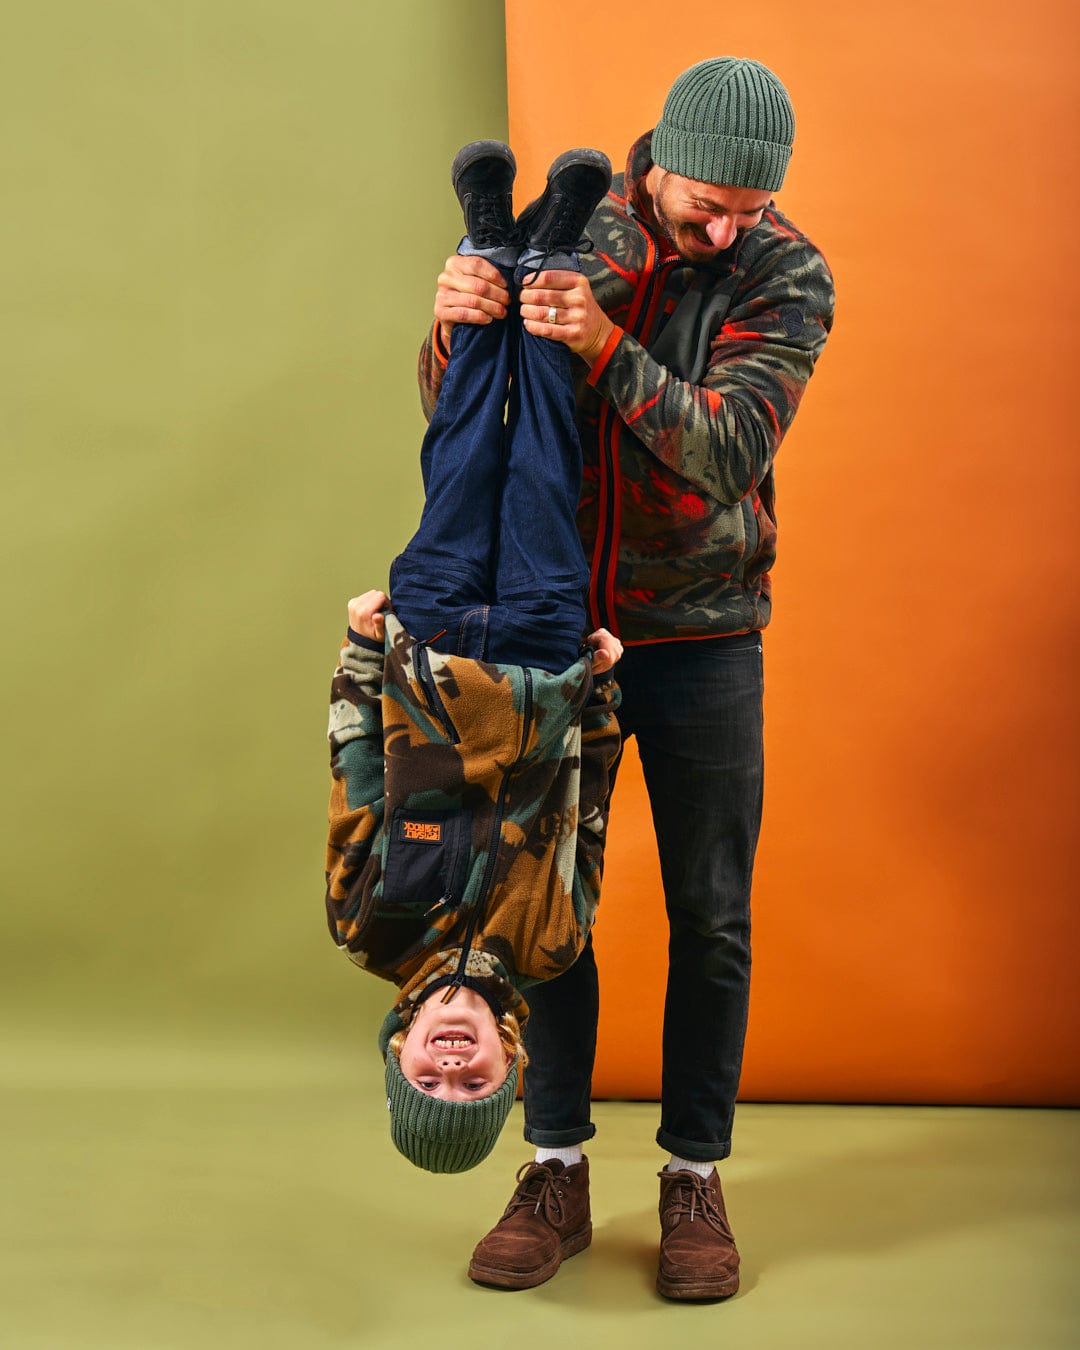 A man is holding a boy upside down in front of an orange background while they both wear Saltrock's Communicado - Kids Camo Zip Fleece - Dark Green jackets with front zip.